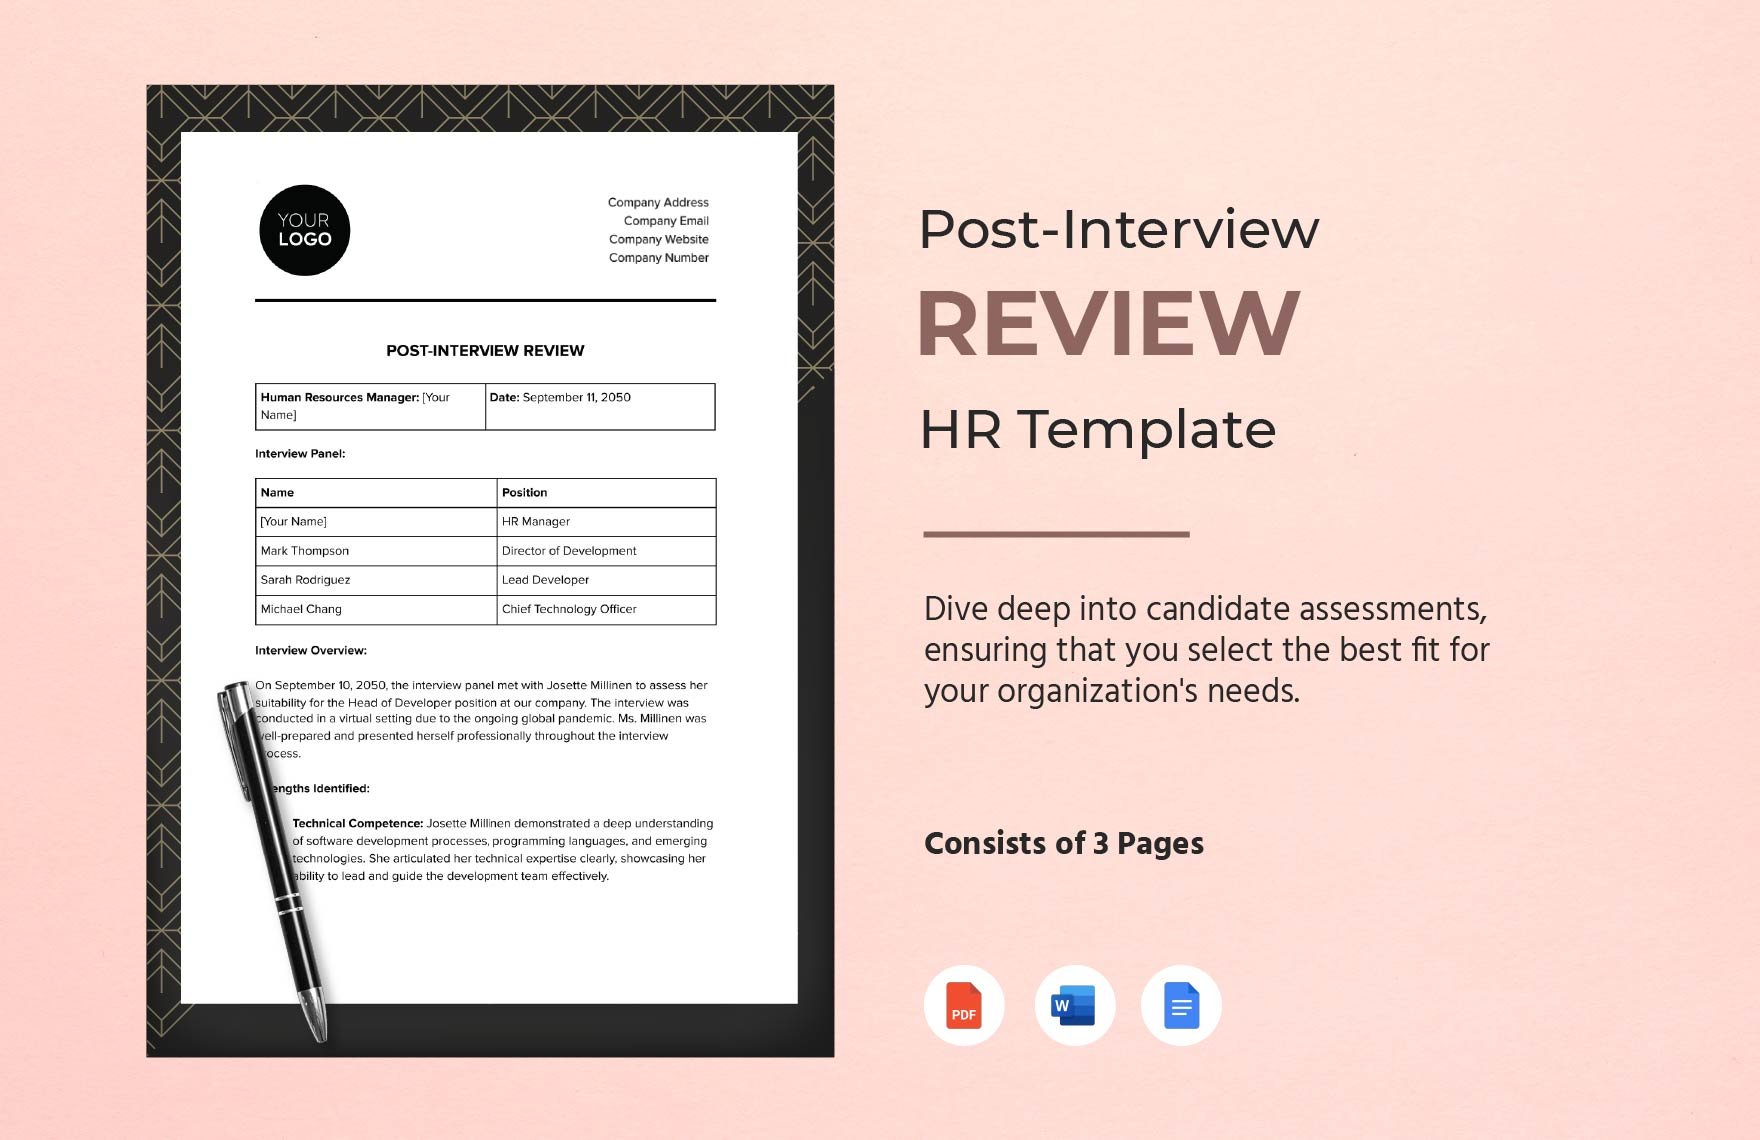 Post-interview Review HR Template